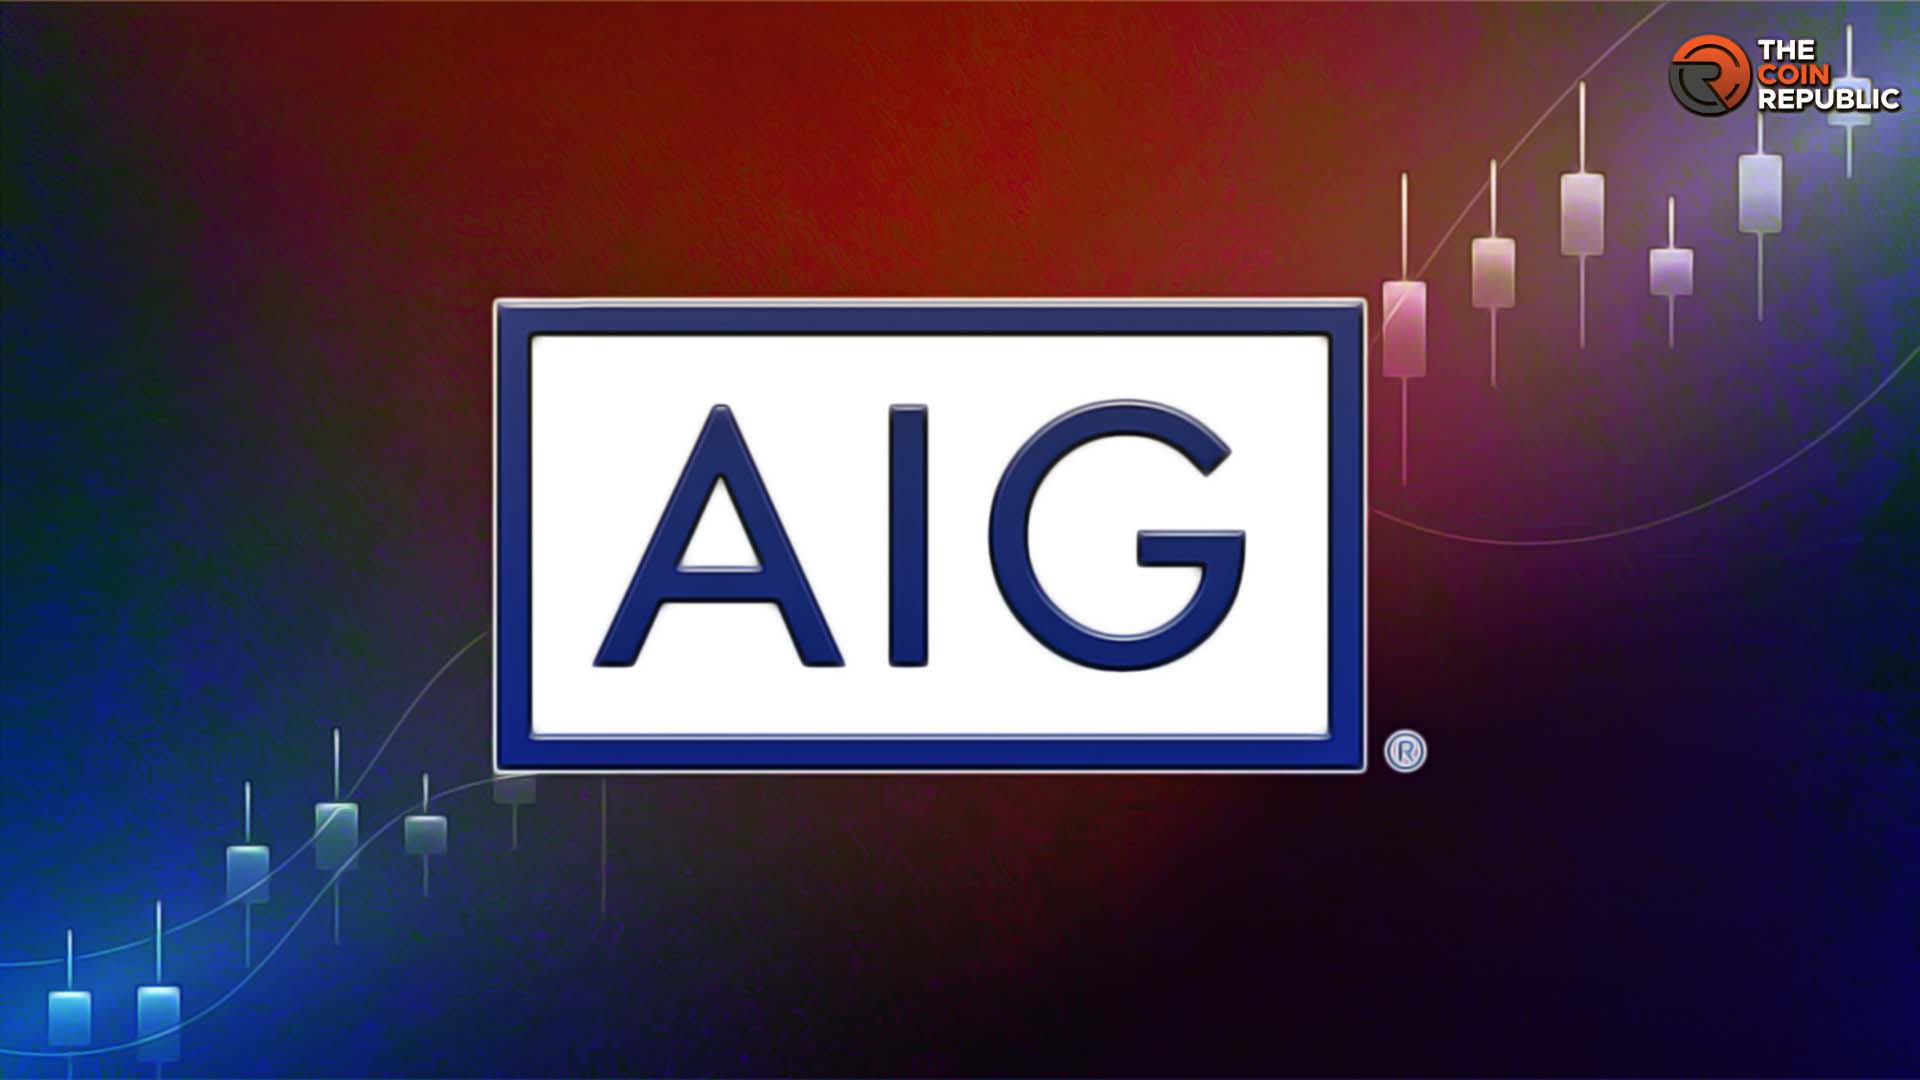 AIG Stock Price Declined Intraday, After Earnings Release News